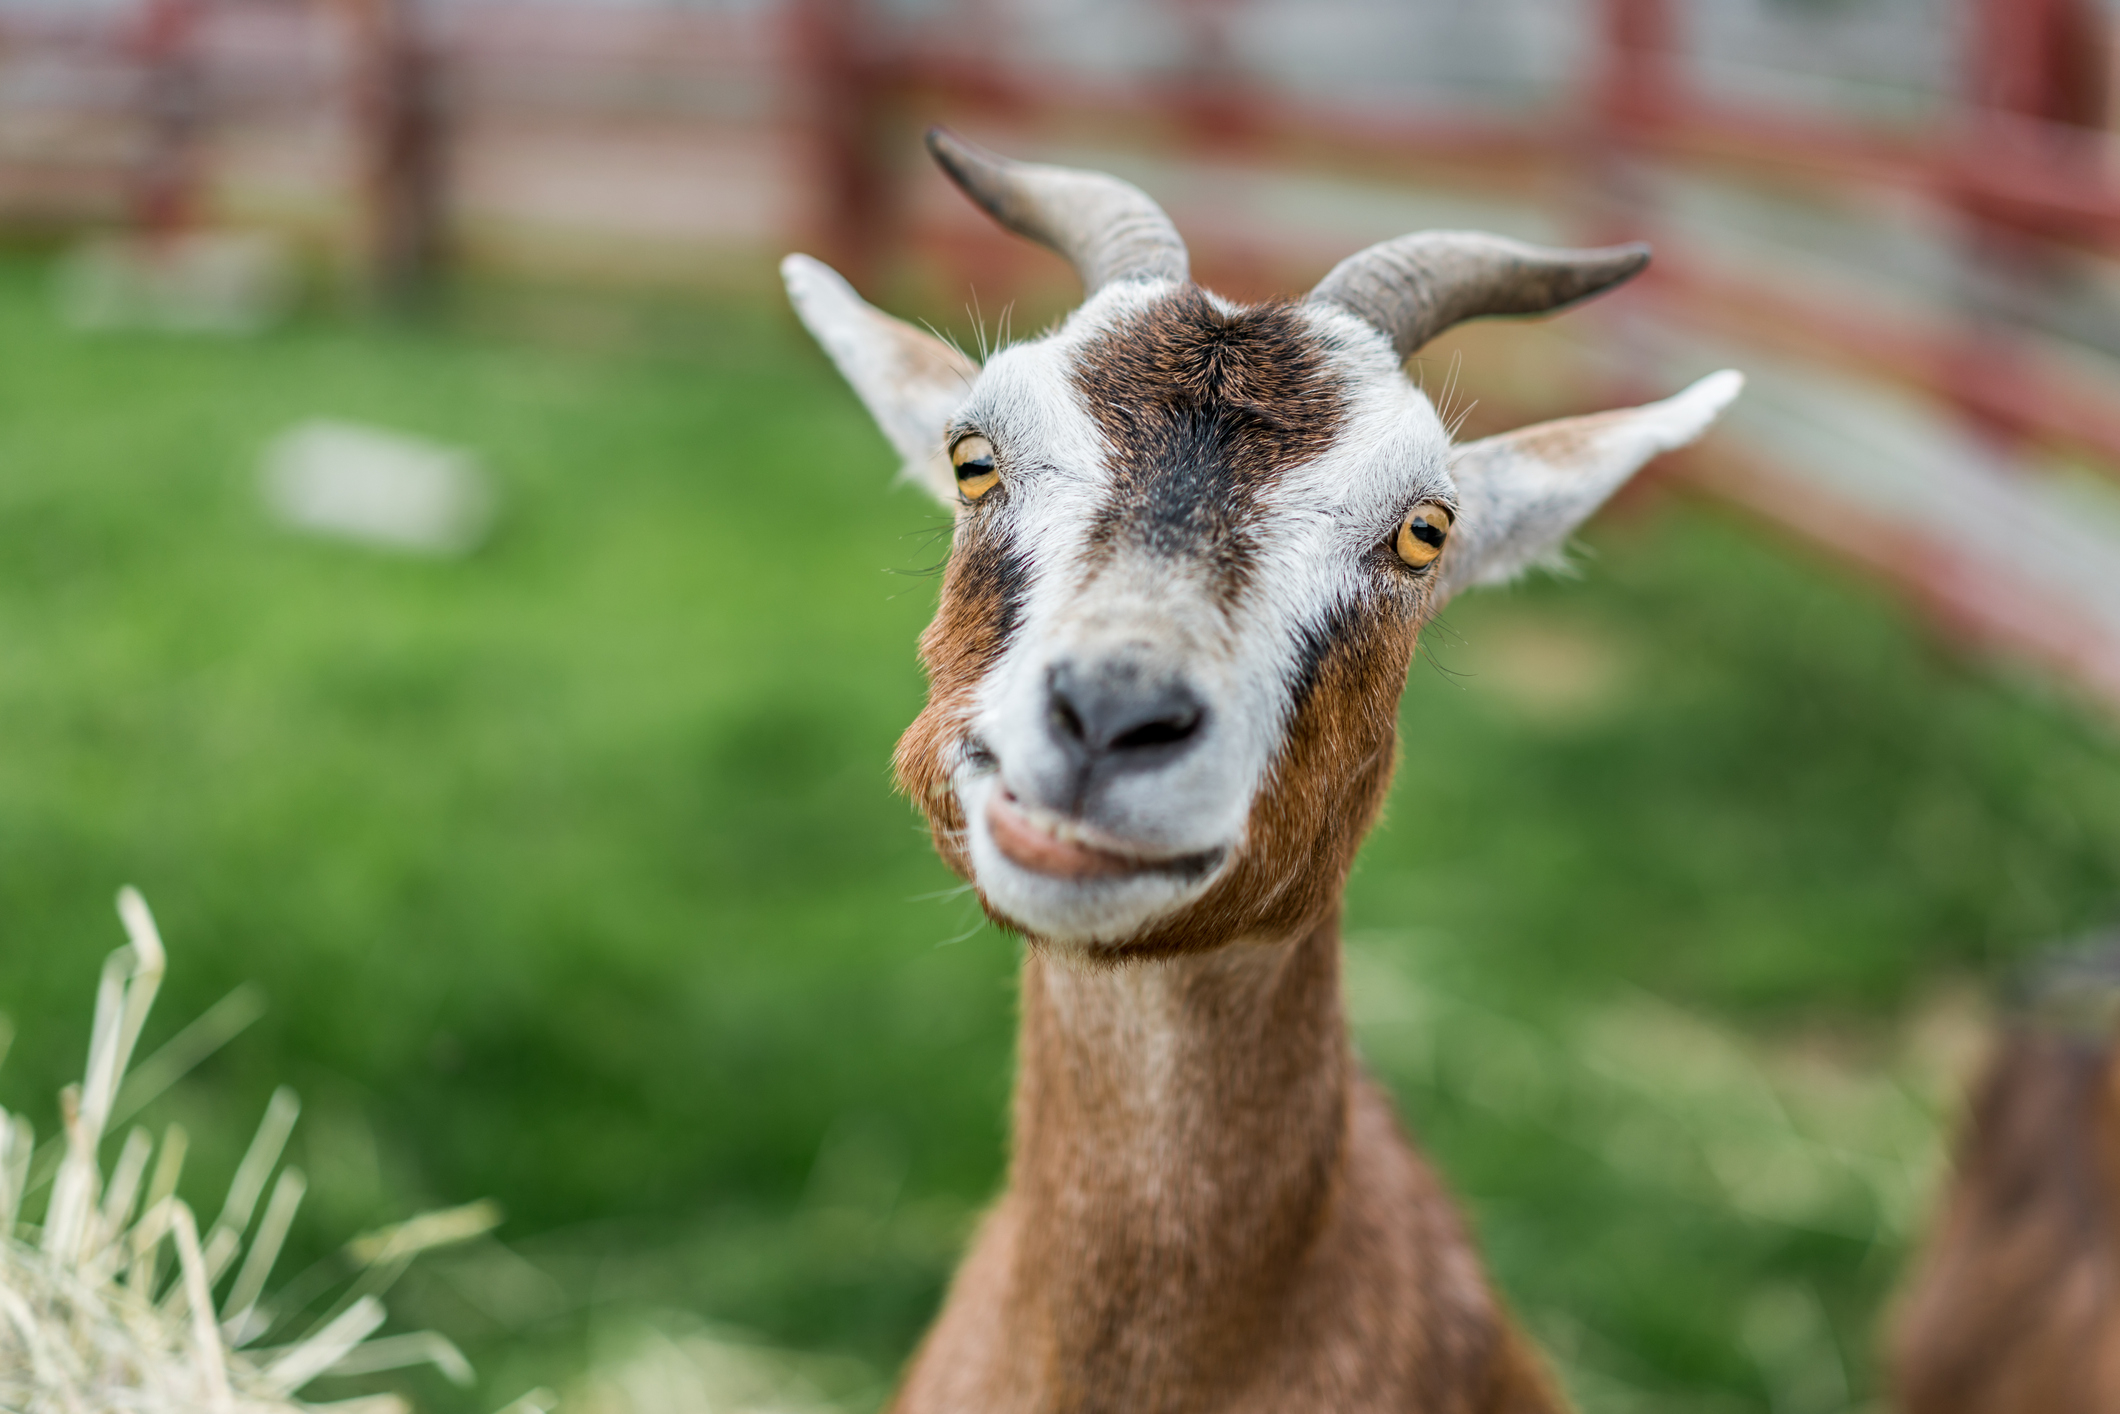 Close-up of a goat facing the camera with a slight head tilt, in a fenced area with greenery